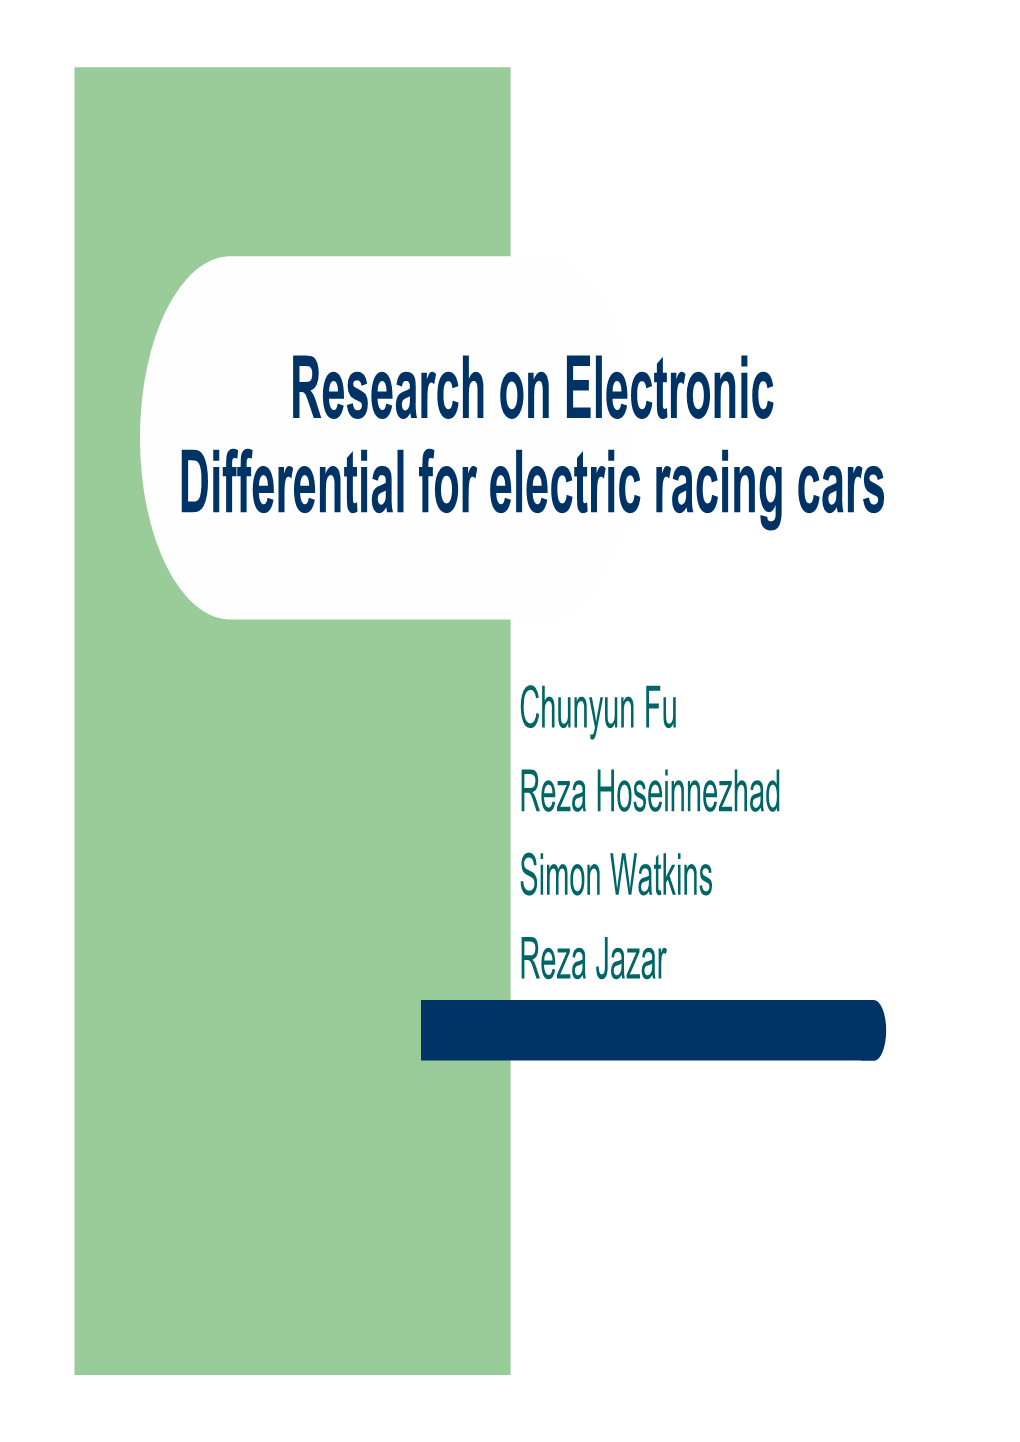 Research on Electronic Differential for Electric Racing Cars